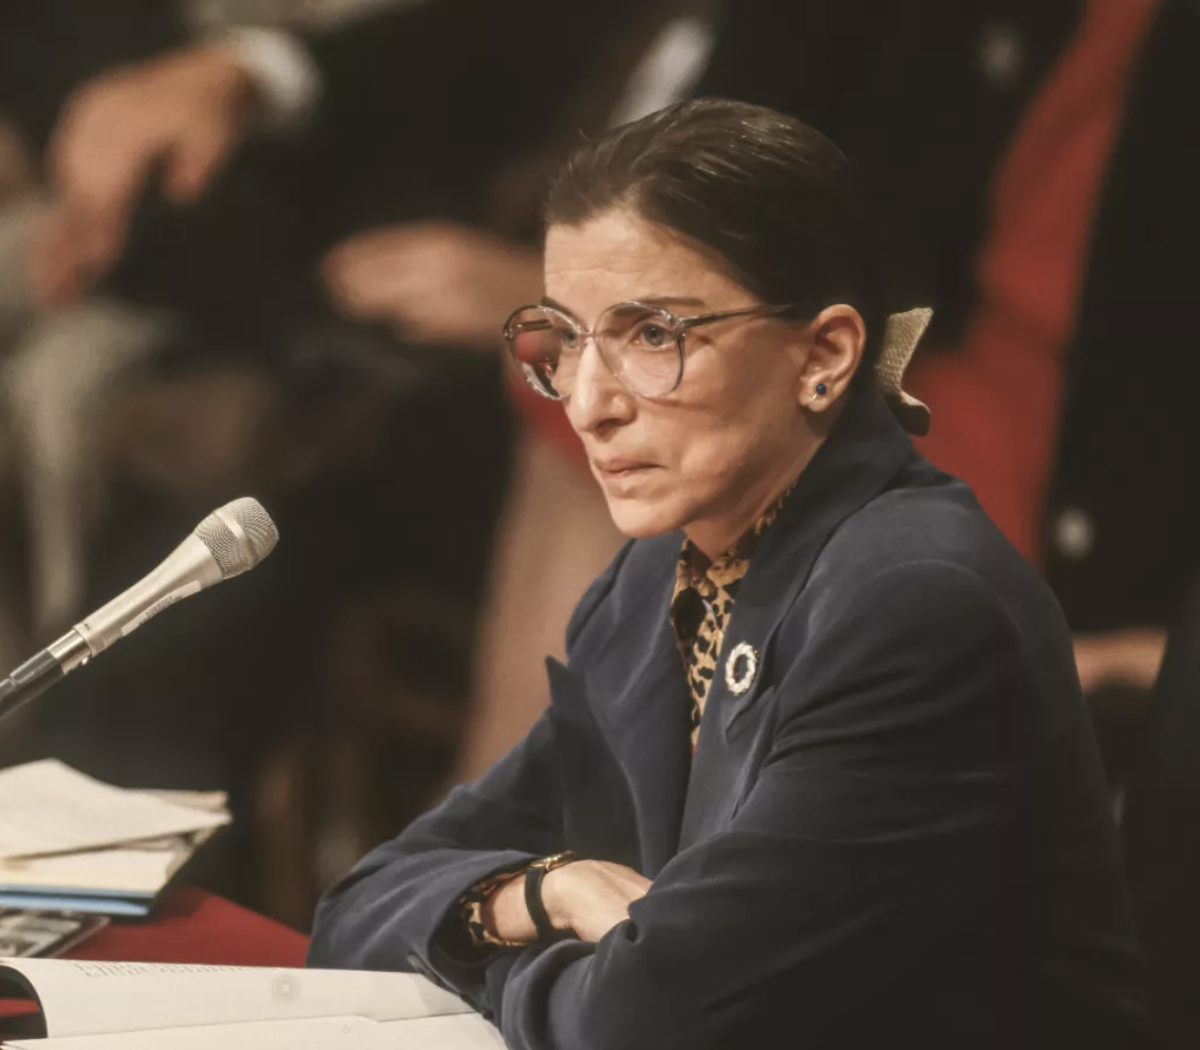 Ruth Bader Ginsburg seen in 1993 during Senate confirmation hearings for her Supreme Court seat.(Image: © Rob Crandall/Shutterstock.com)